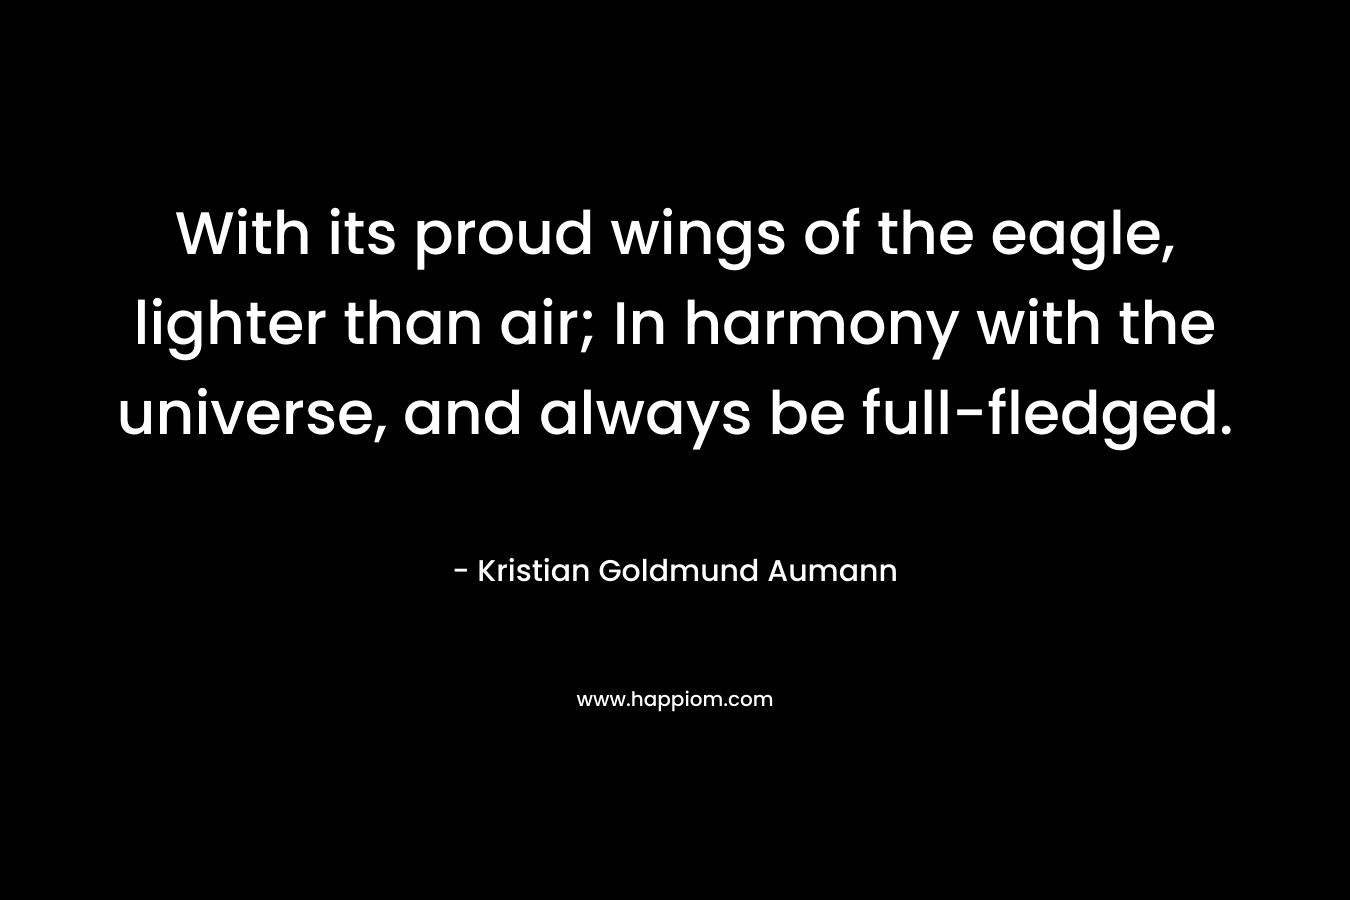 With its proud wings of the eagle, lighter than air; In harmony with the universe, and always be full-fledged. – Kristian Goldmund Aumann